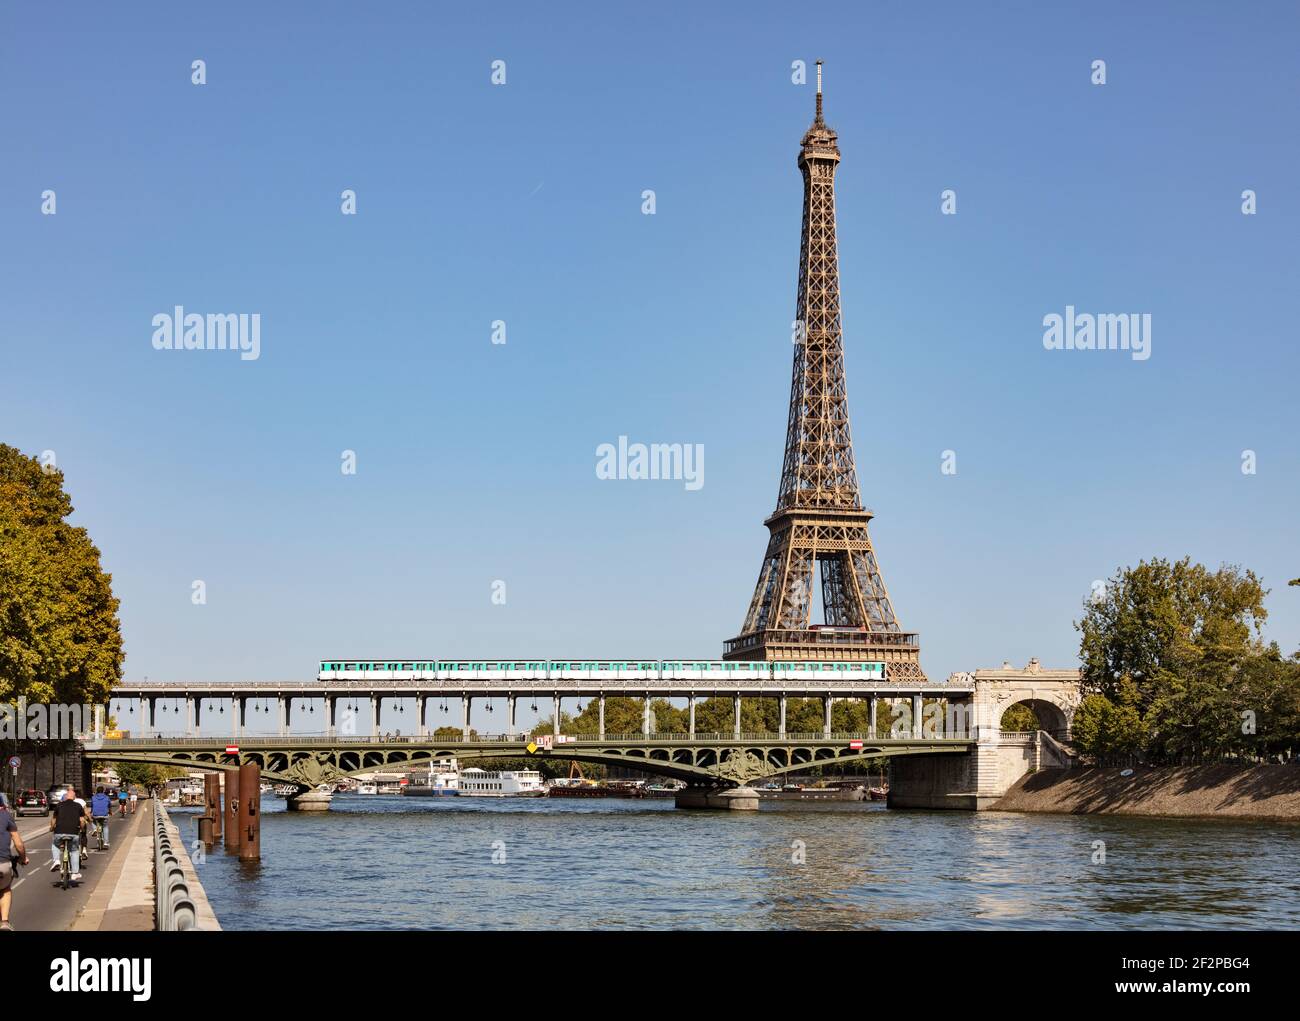 France, Paris, Eiffel Tower, metro drives over a bridge and crosses the Seine, railcars run on rubber tires Stock Photo